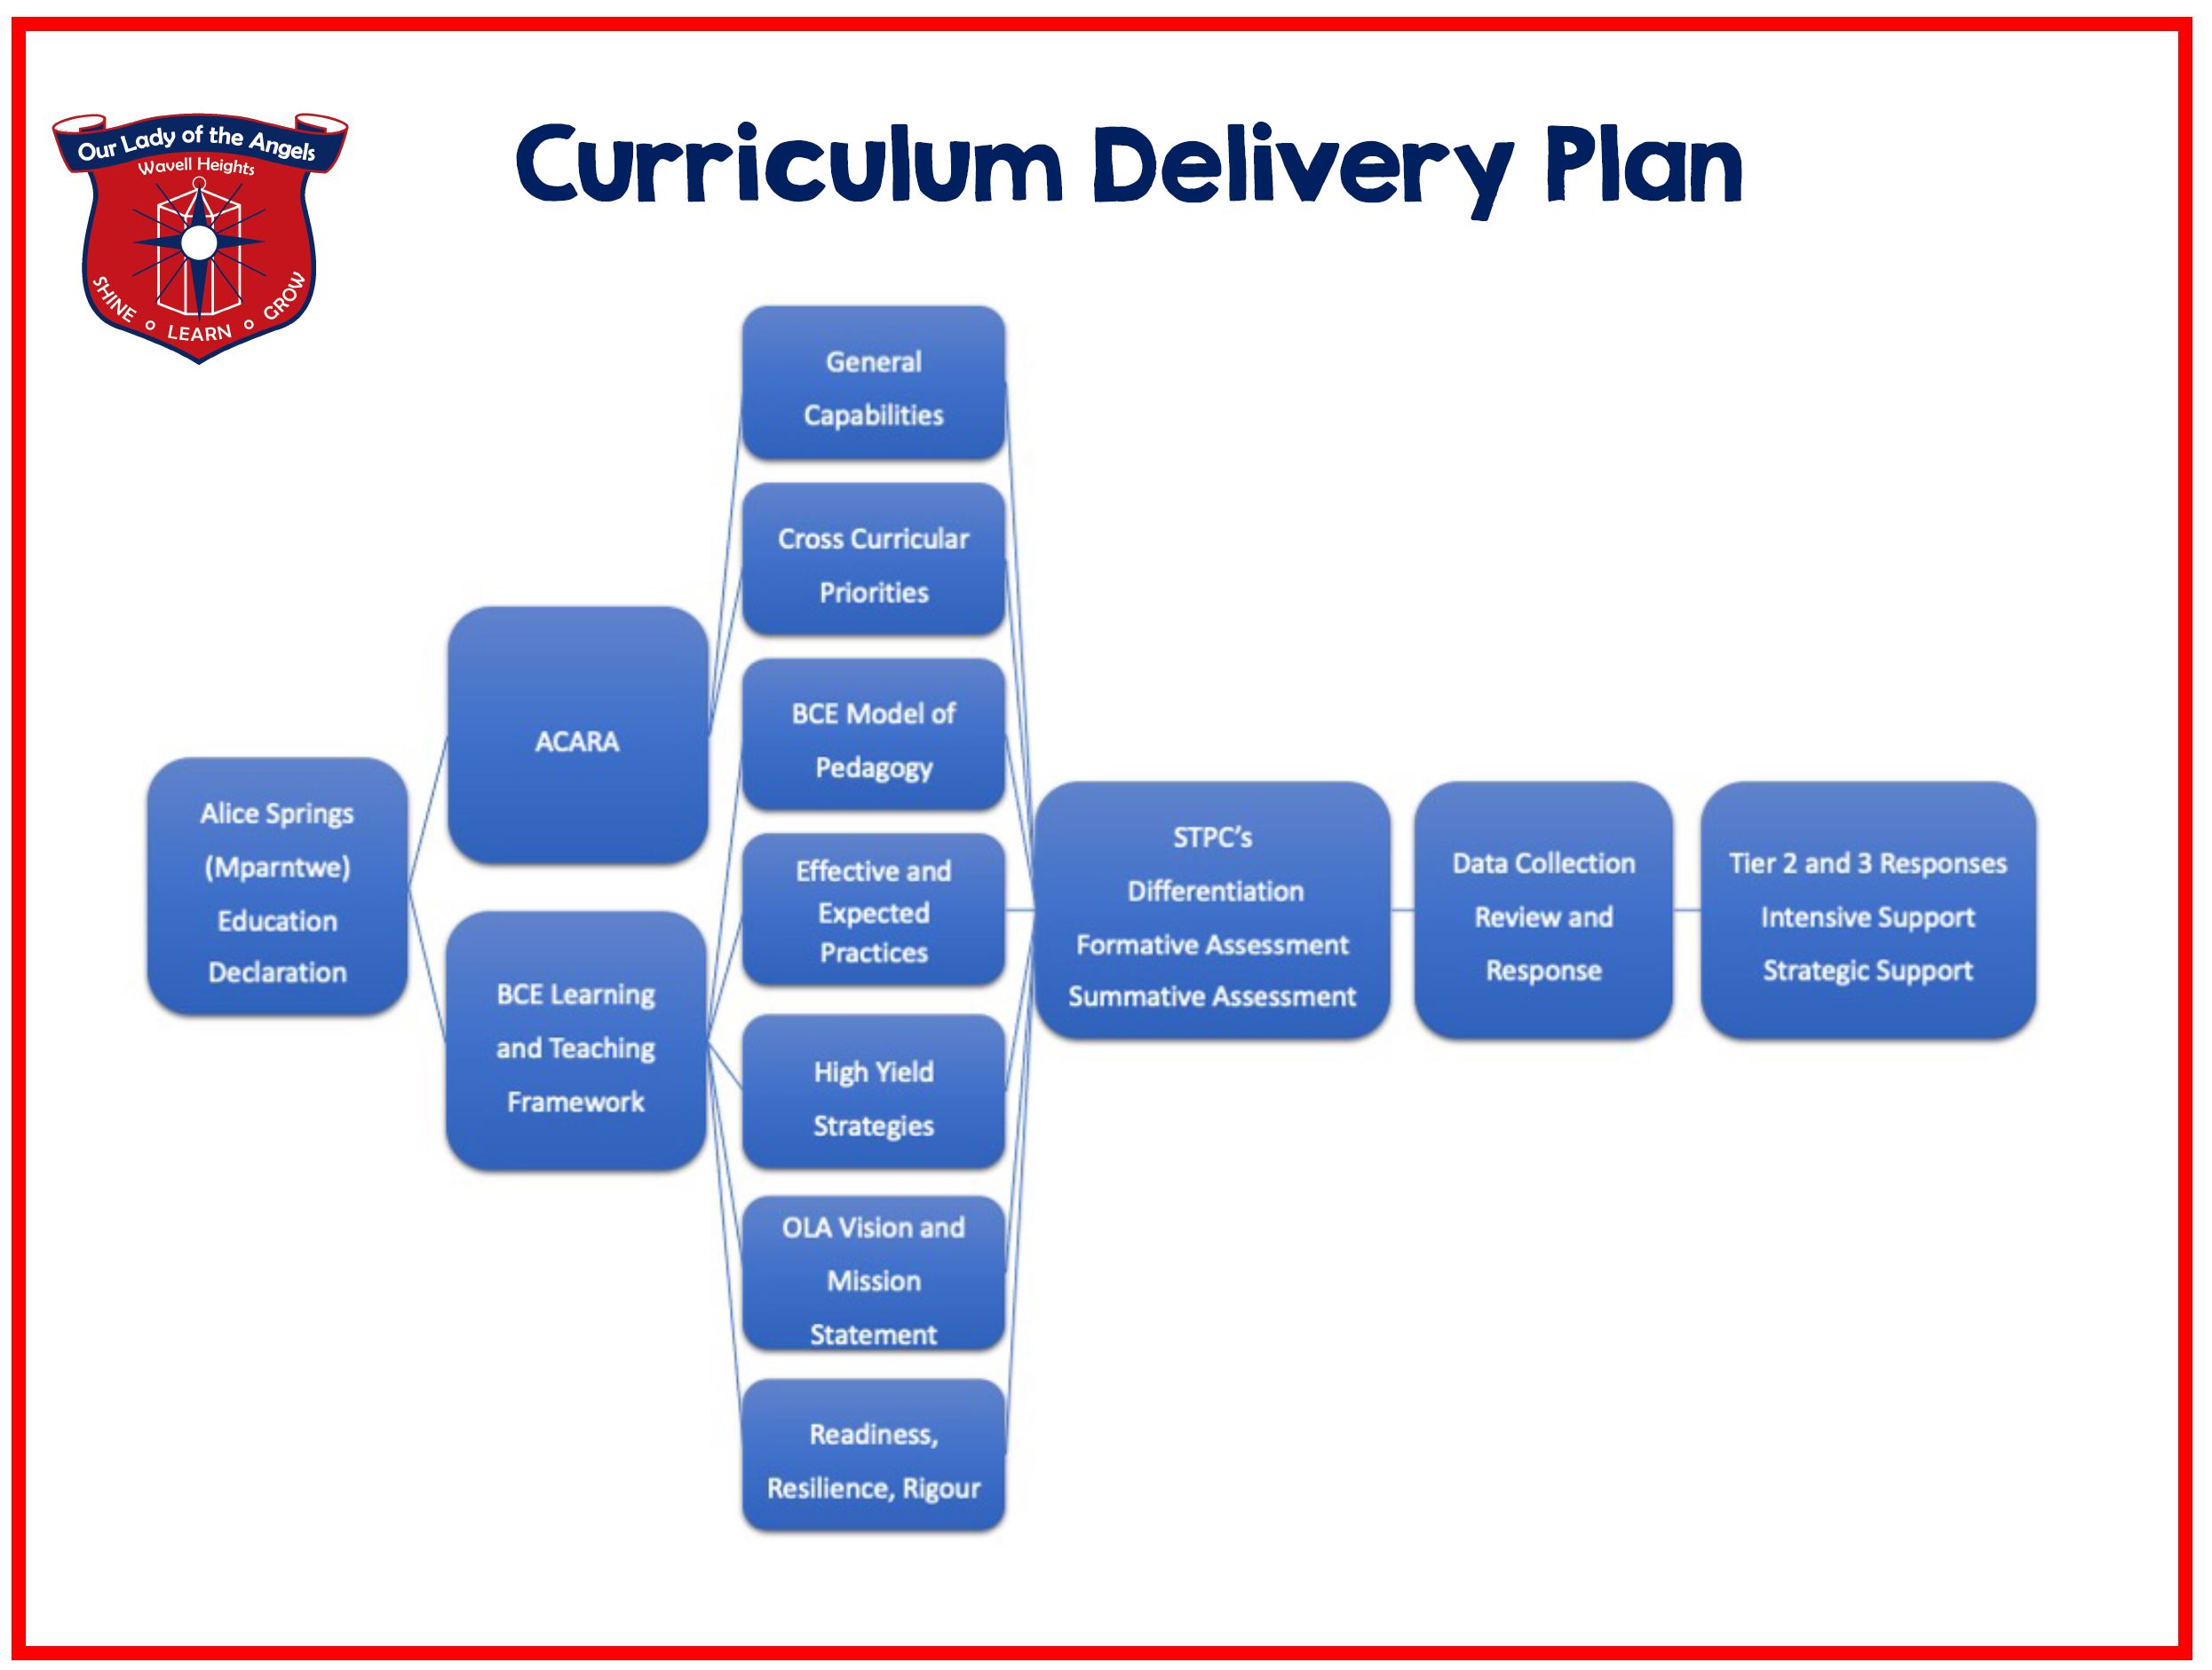 Curriculum Delivery plan.JPG